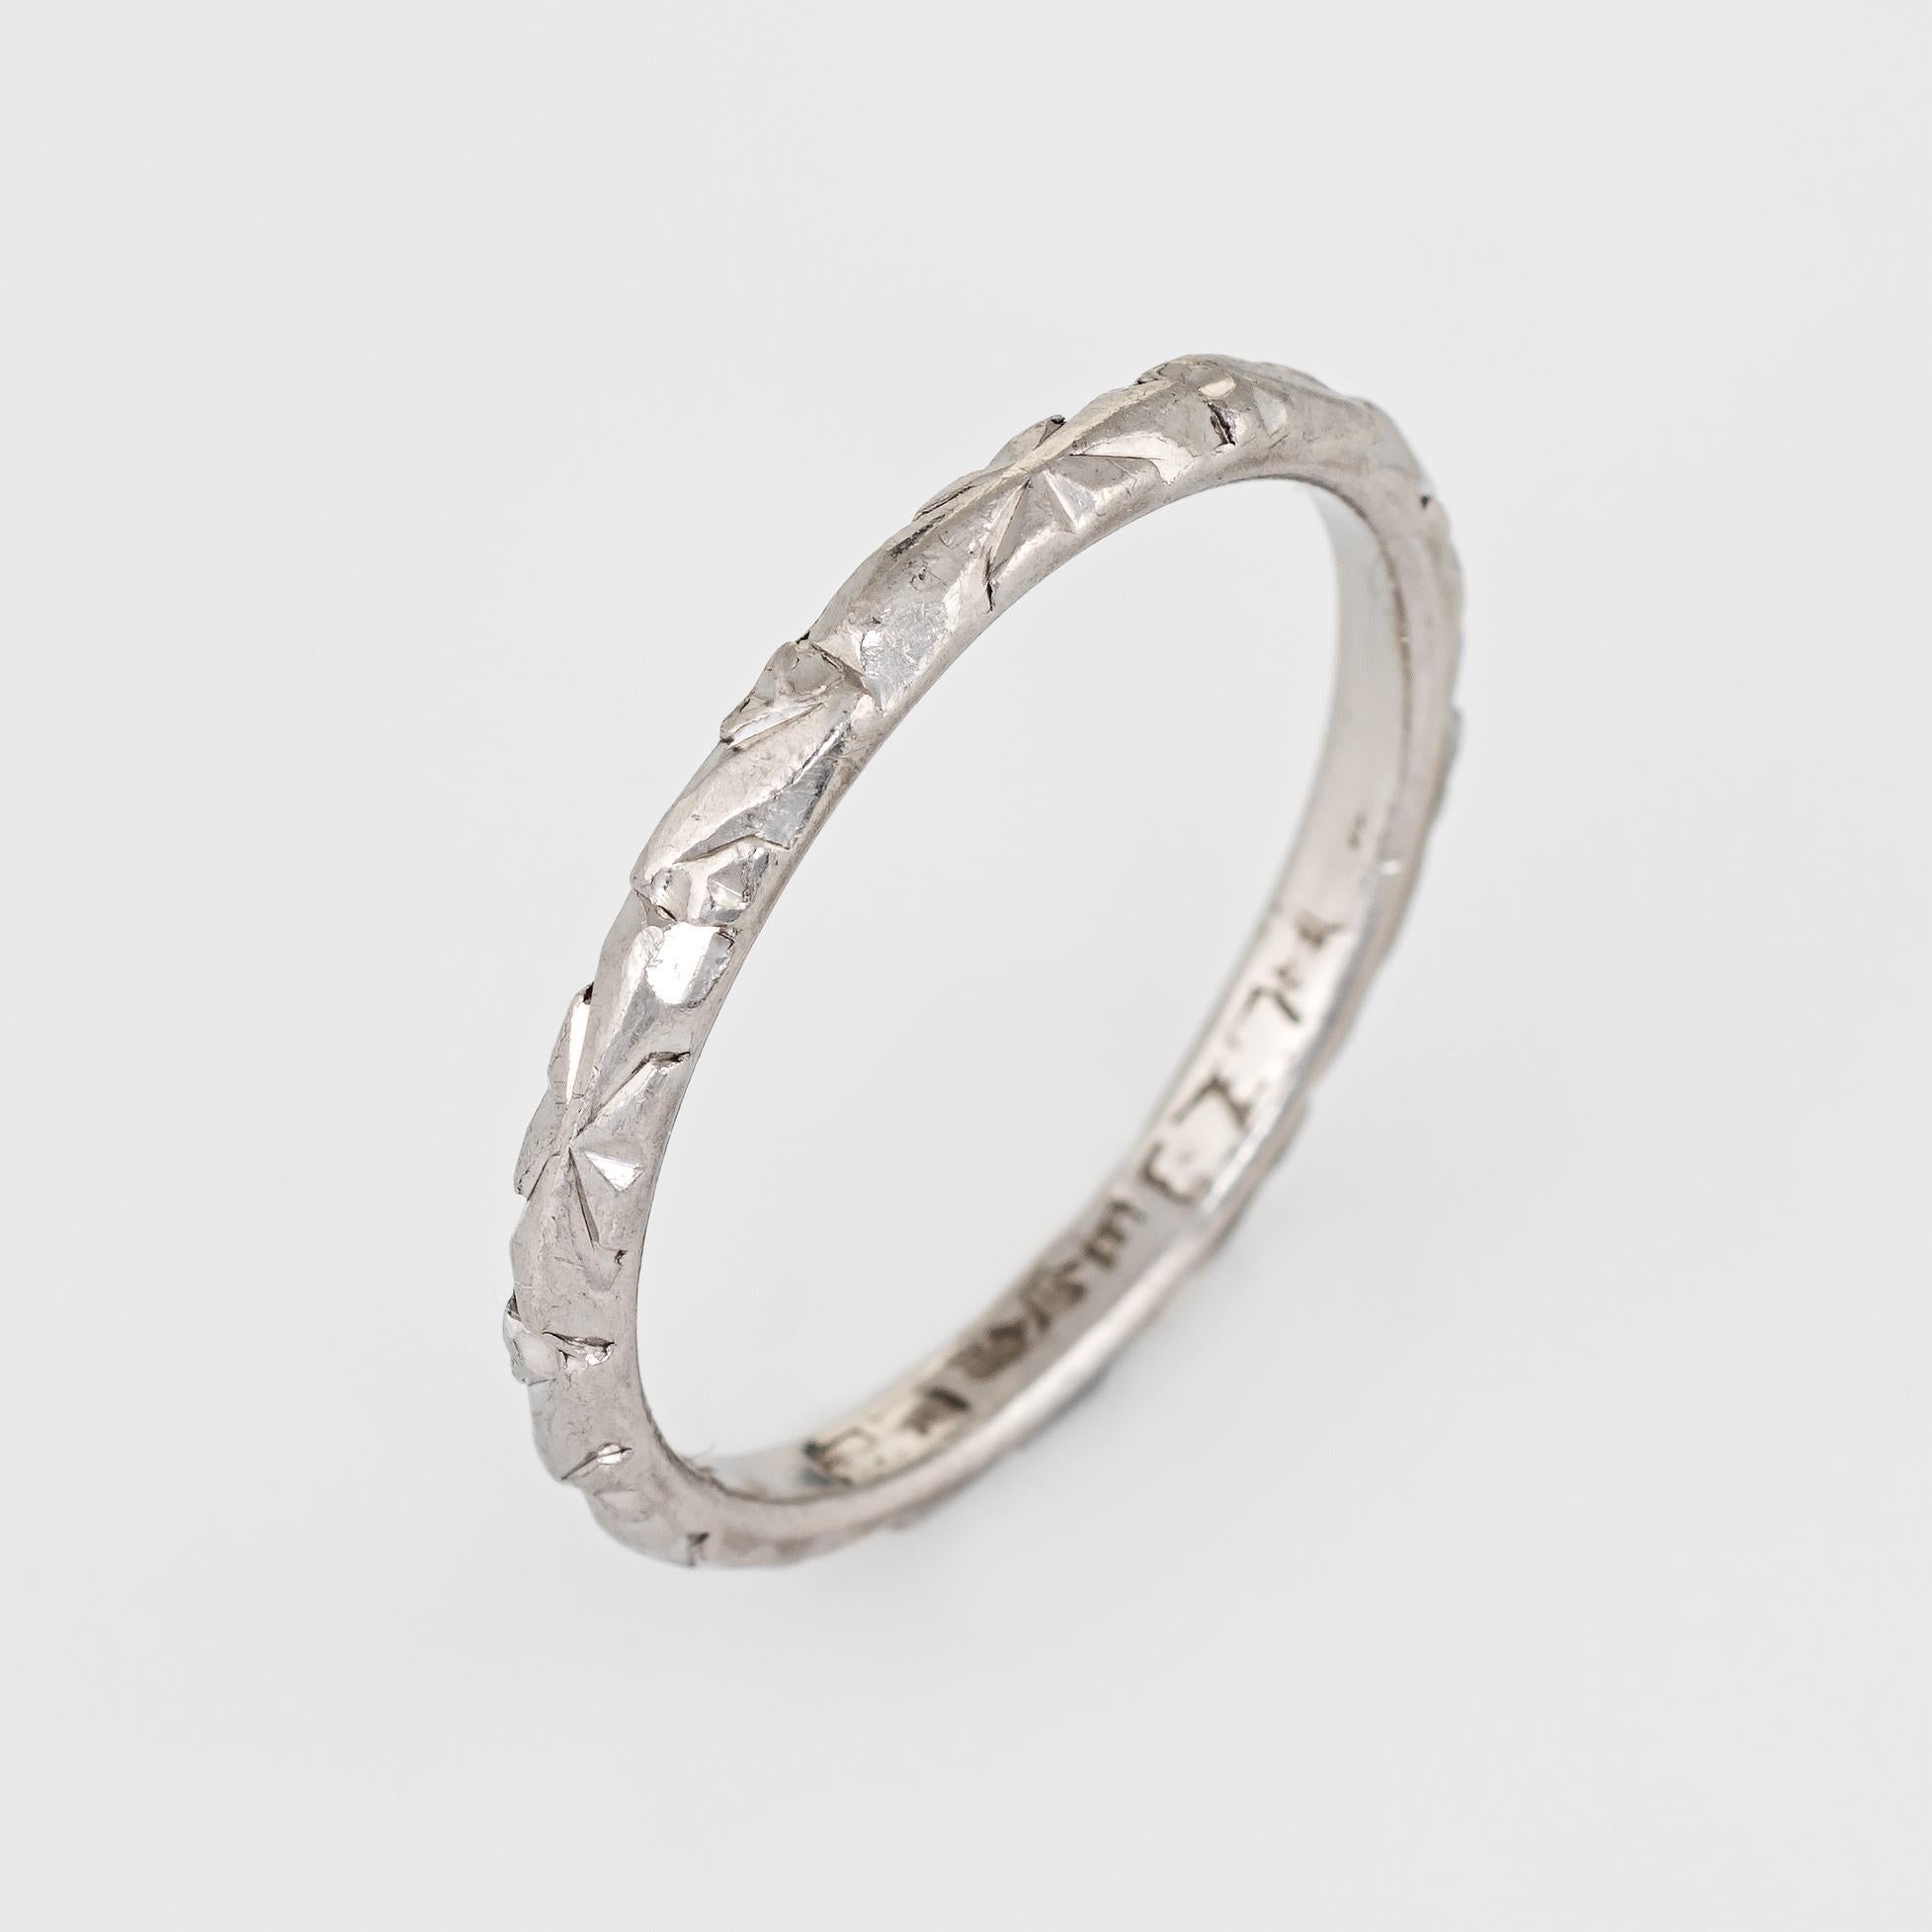 Finely detailed vintage wedding band (circa 1959), crafted in 900 platinum. 

The ring epitomizes vintage charm and would make a lovely alternative wedding ring. The outer band features a floral pattern in very good condition showing minimal wear.